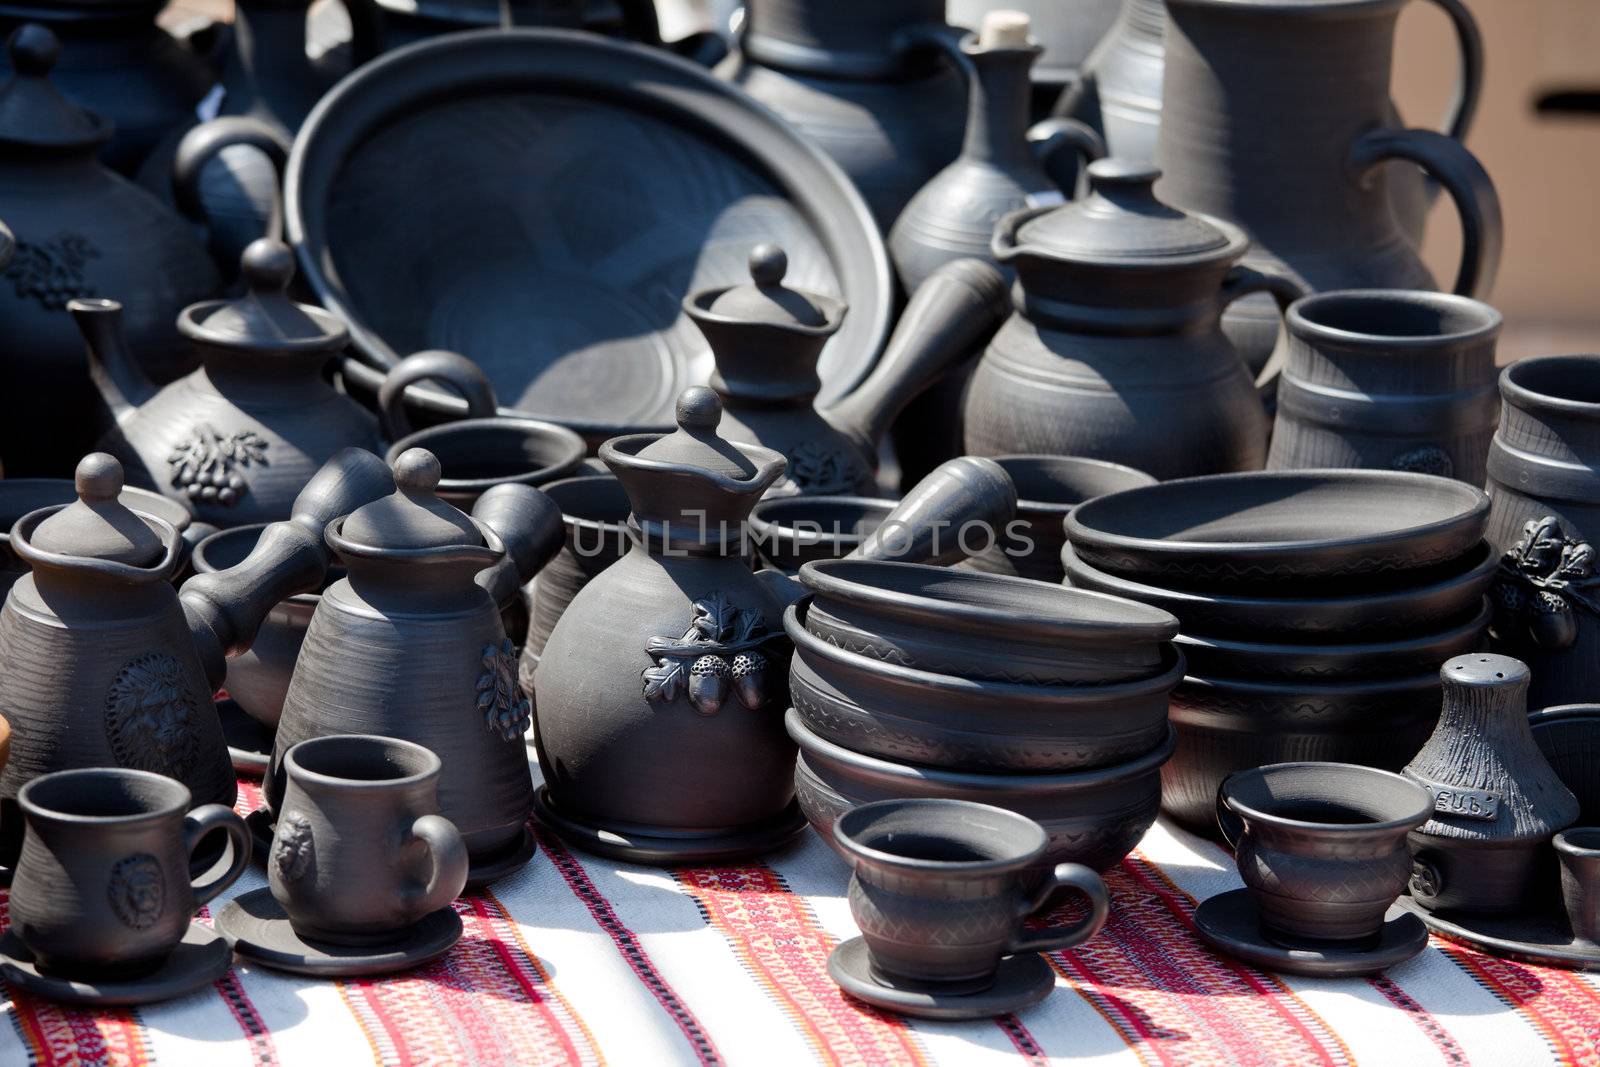 Rustic handmade black ceramic pottery souvenirs (plates, bowls, teapots, cups) on embroidered traditional Ukrainian towel at street handicraft market